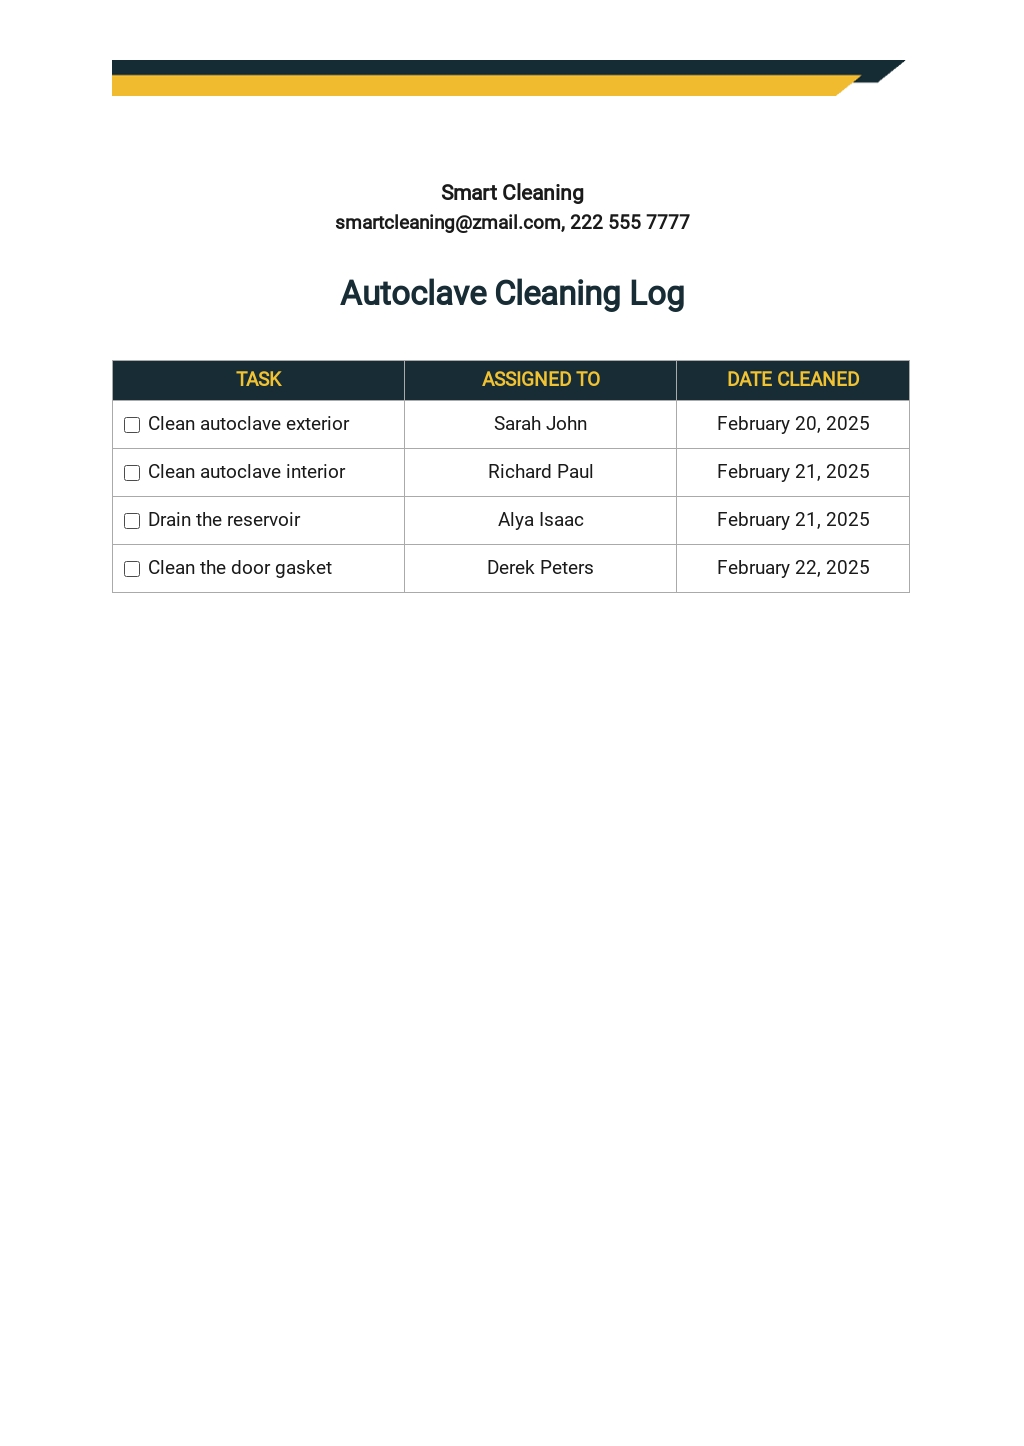 Autoclave Cleaning Log Template.jpe